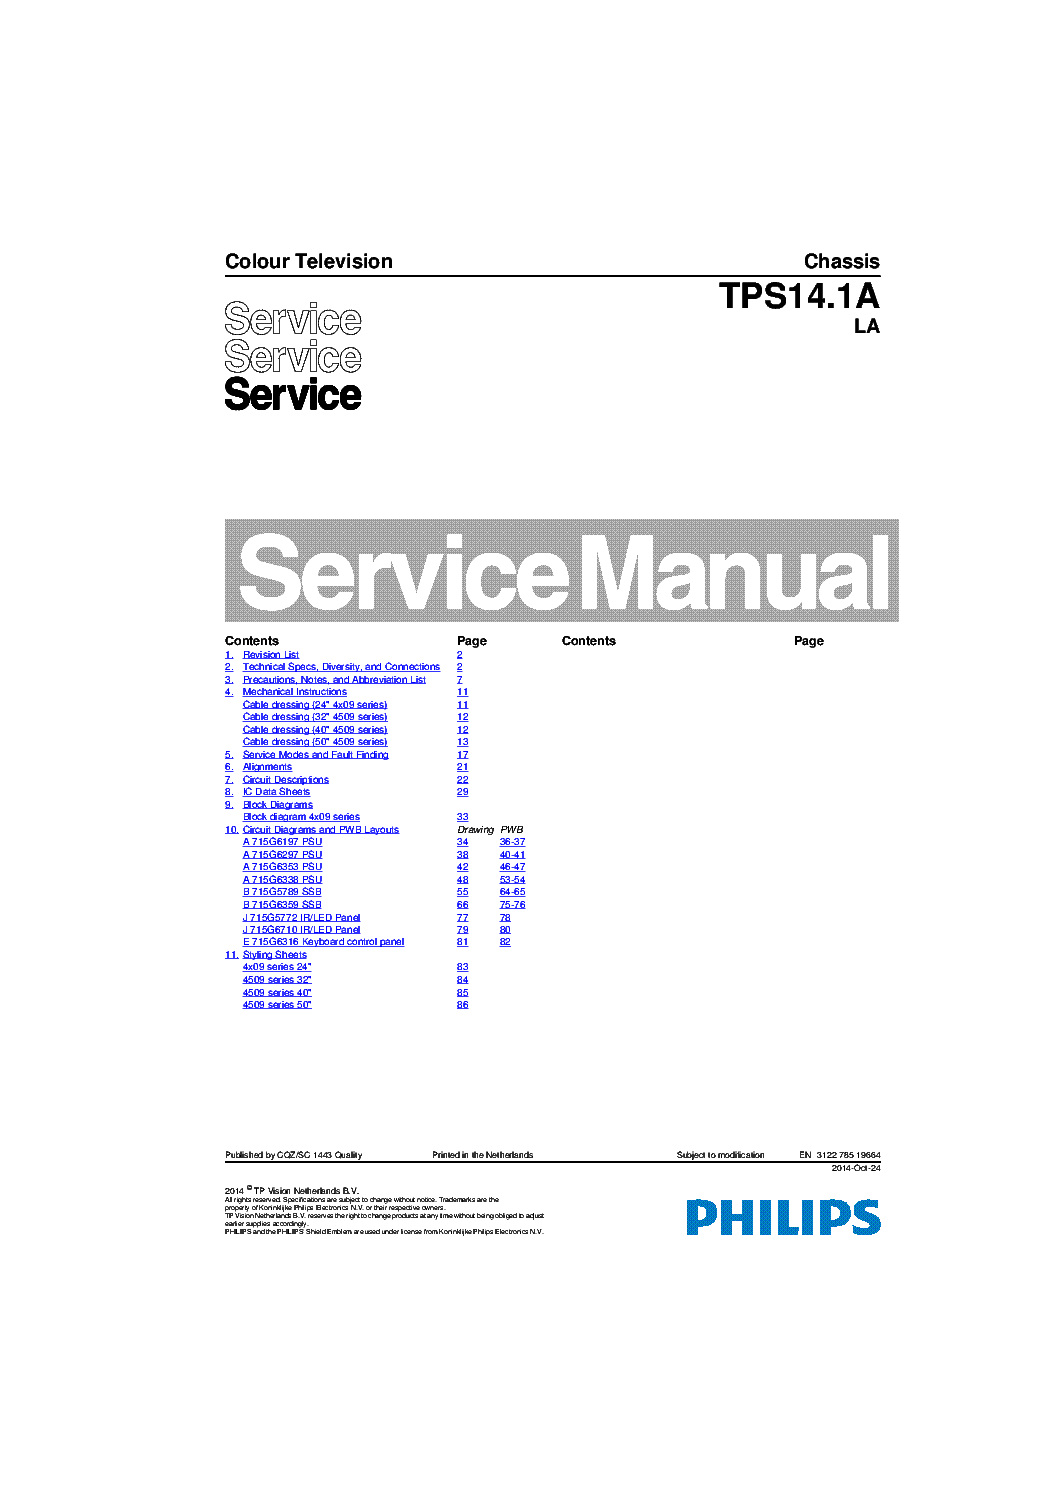 PHILIPS TPS14.1ALA 312278519664 141024 service manual (1st page)